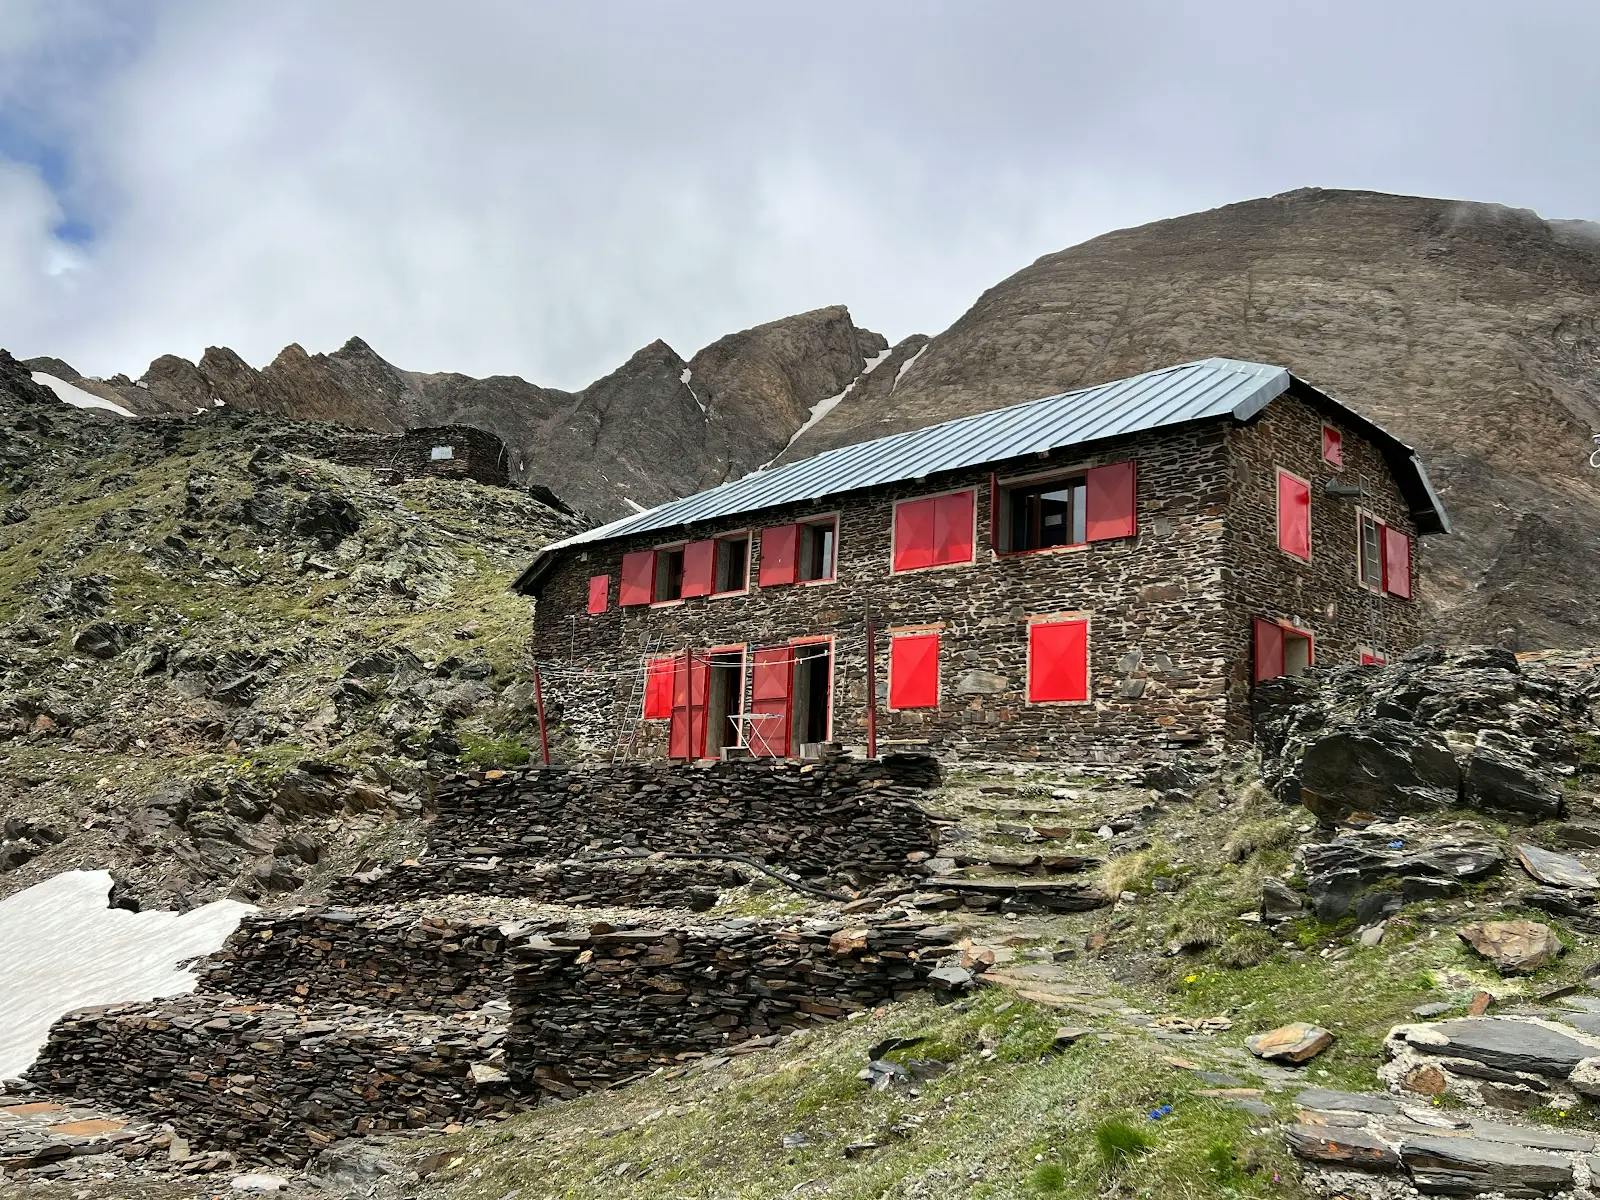 Rifugio 3A: A refuge in the heart of the mountains